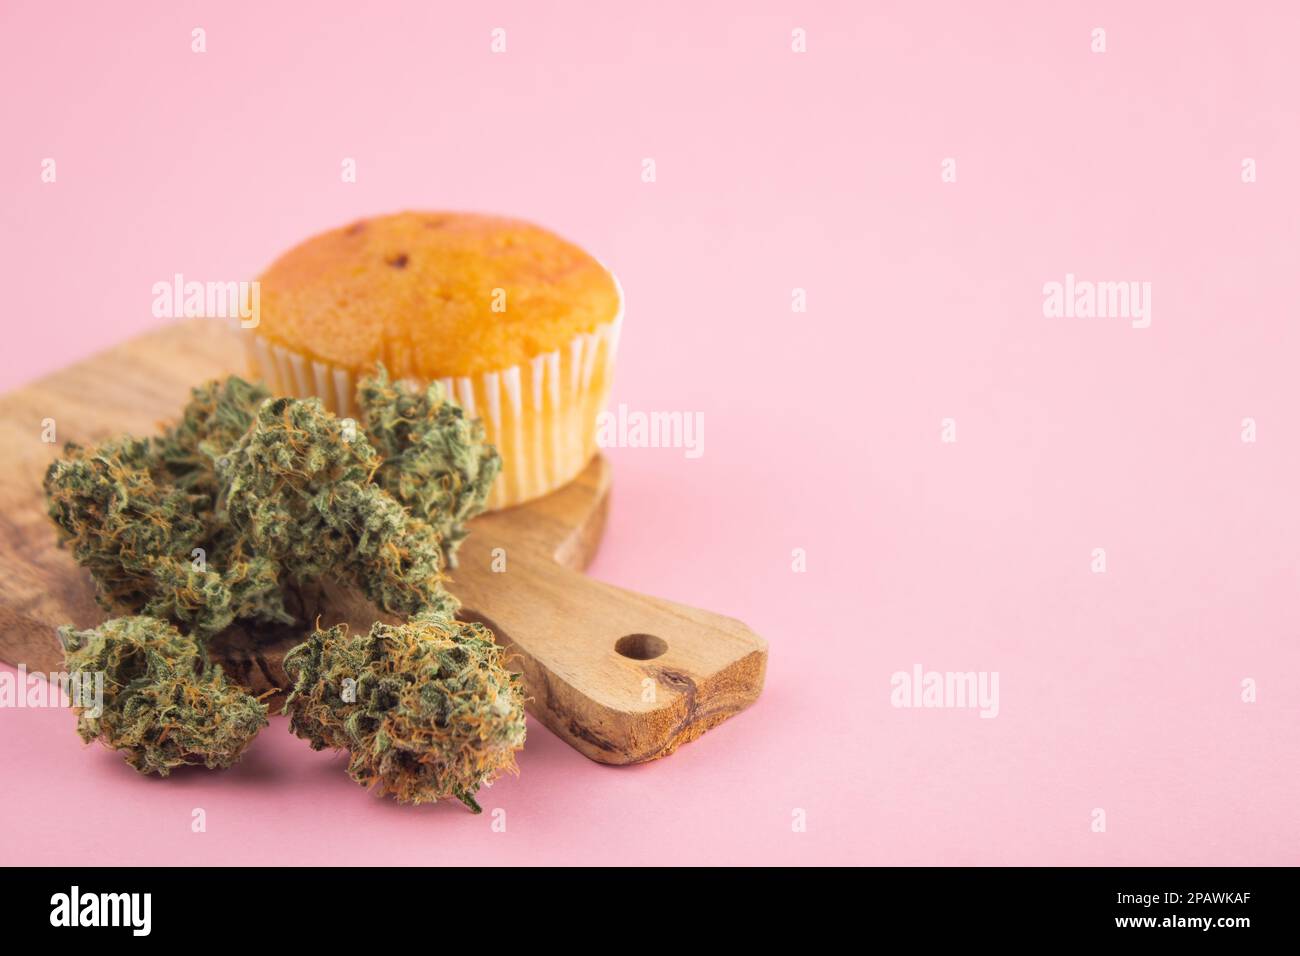 On a wooden board, a cupcake with the addition of cannabis, dry marijuana buds in the foreground.  On a pink background, a lot of empty space Stock Photo